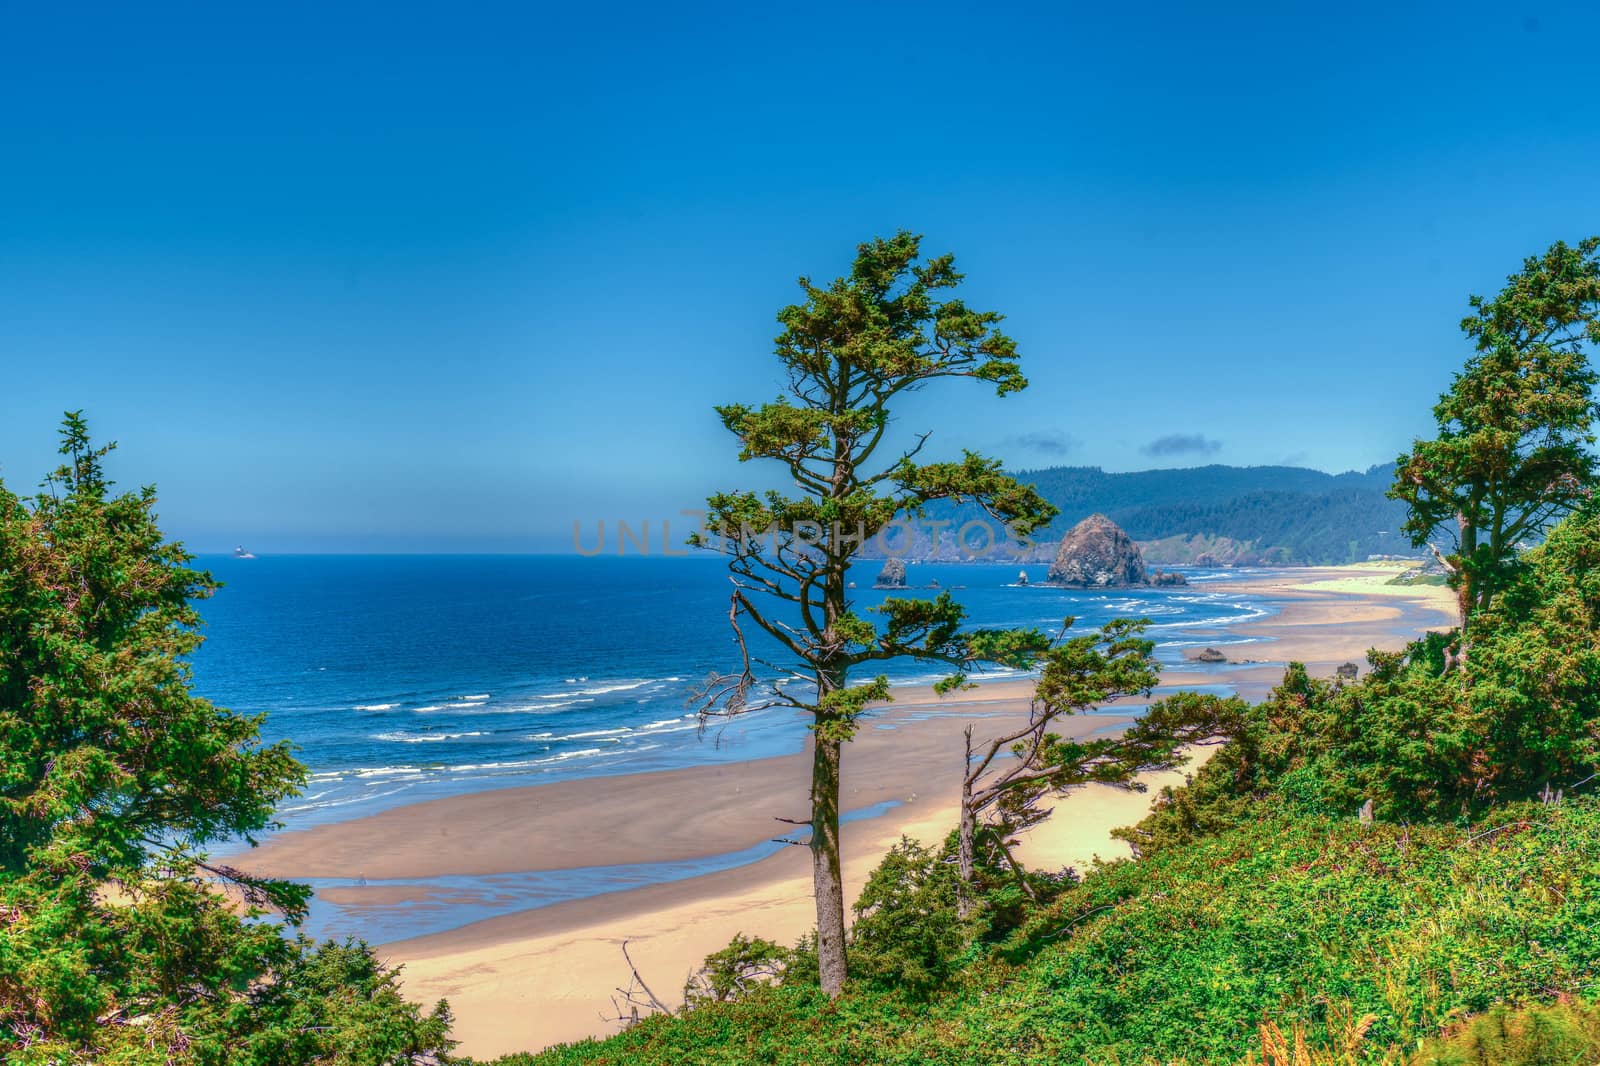 Cannon Beach viewed from Highway 101 on the Oregon Coast.